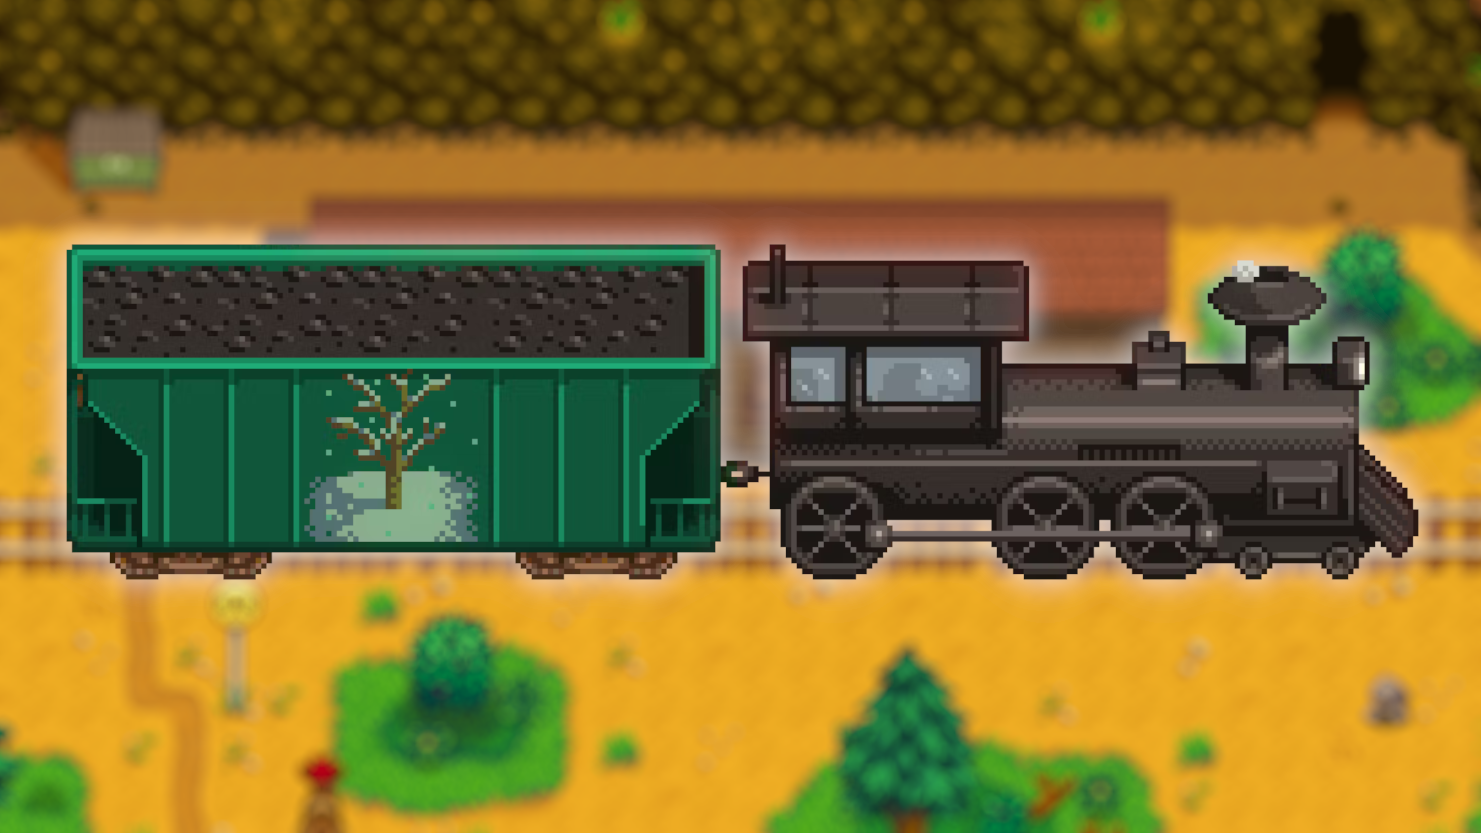 One of the trains in Stardew Valley